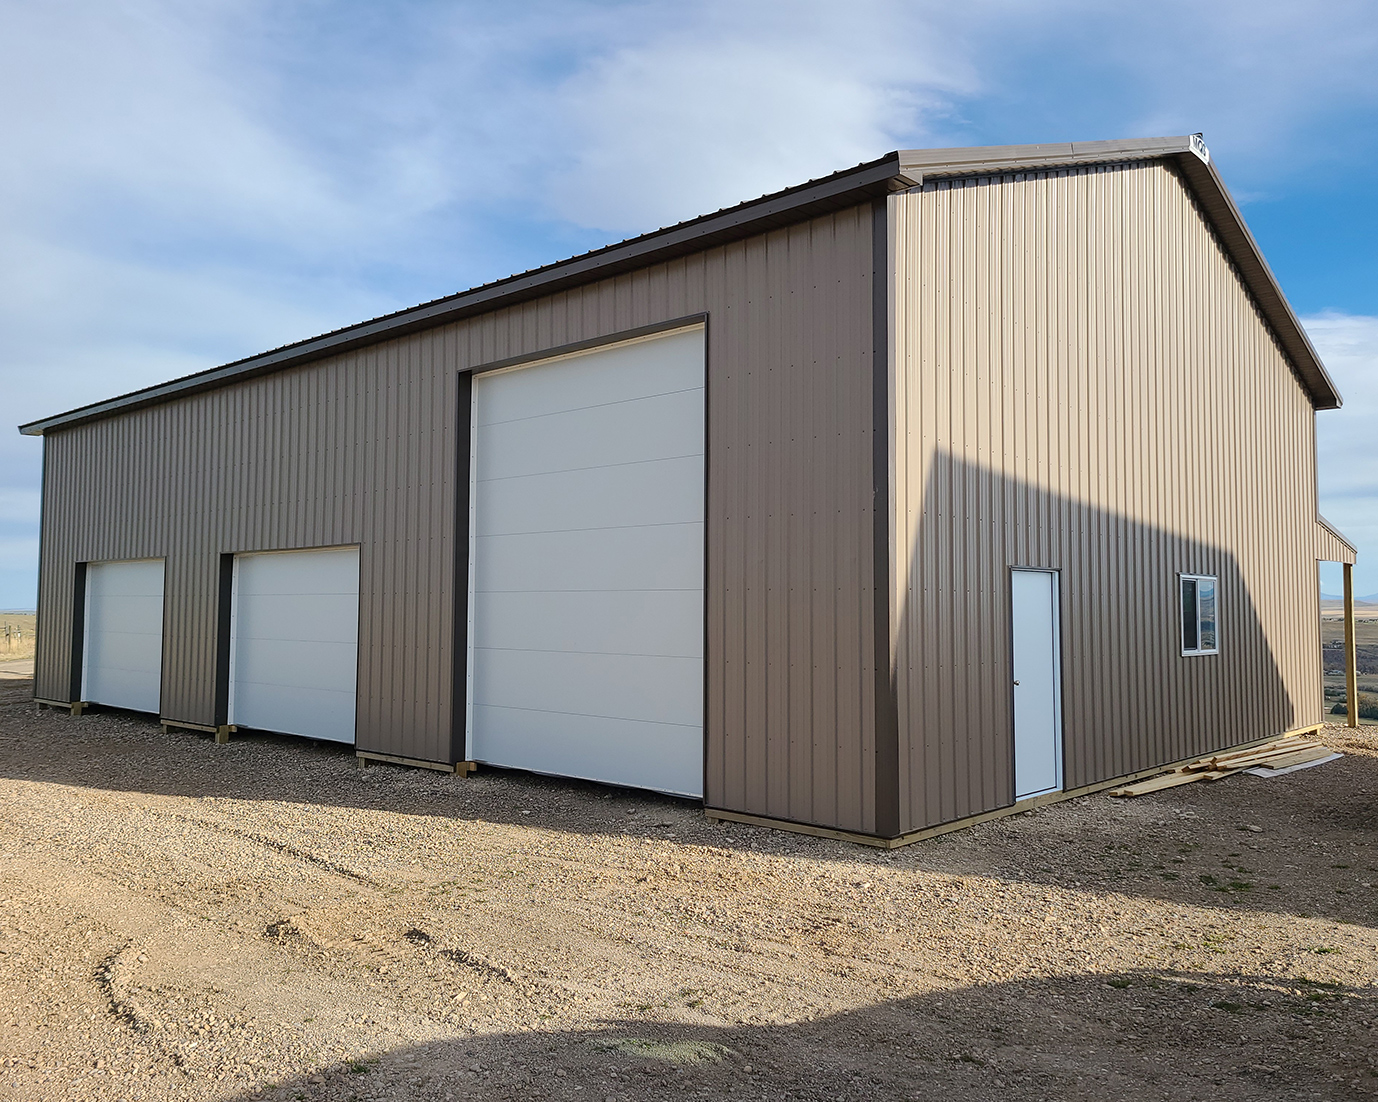 Making Sure Your Site is Ready for Your New Garage in Coeur d’Alene